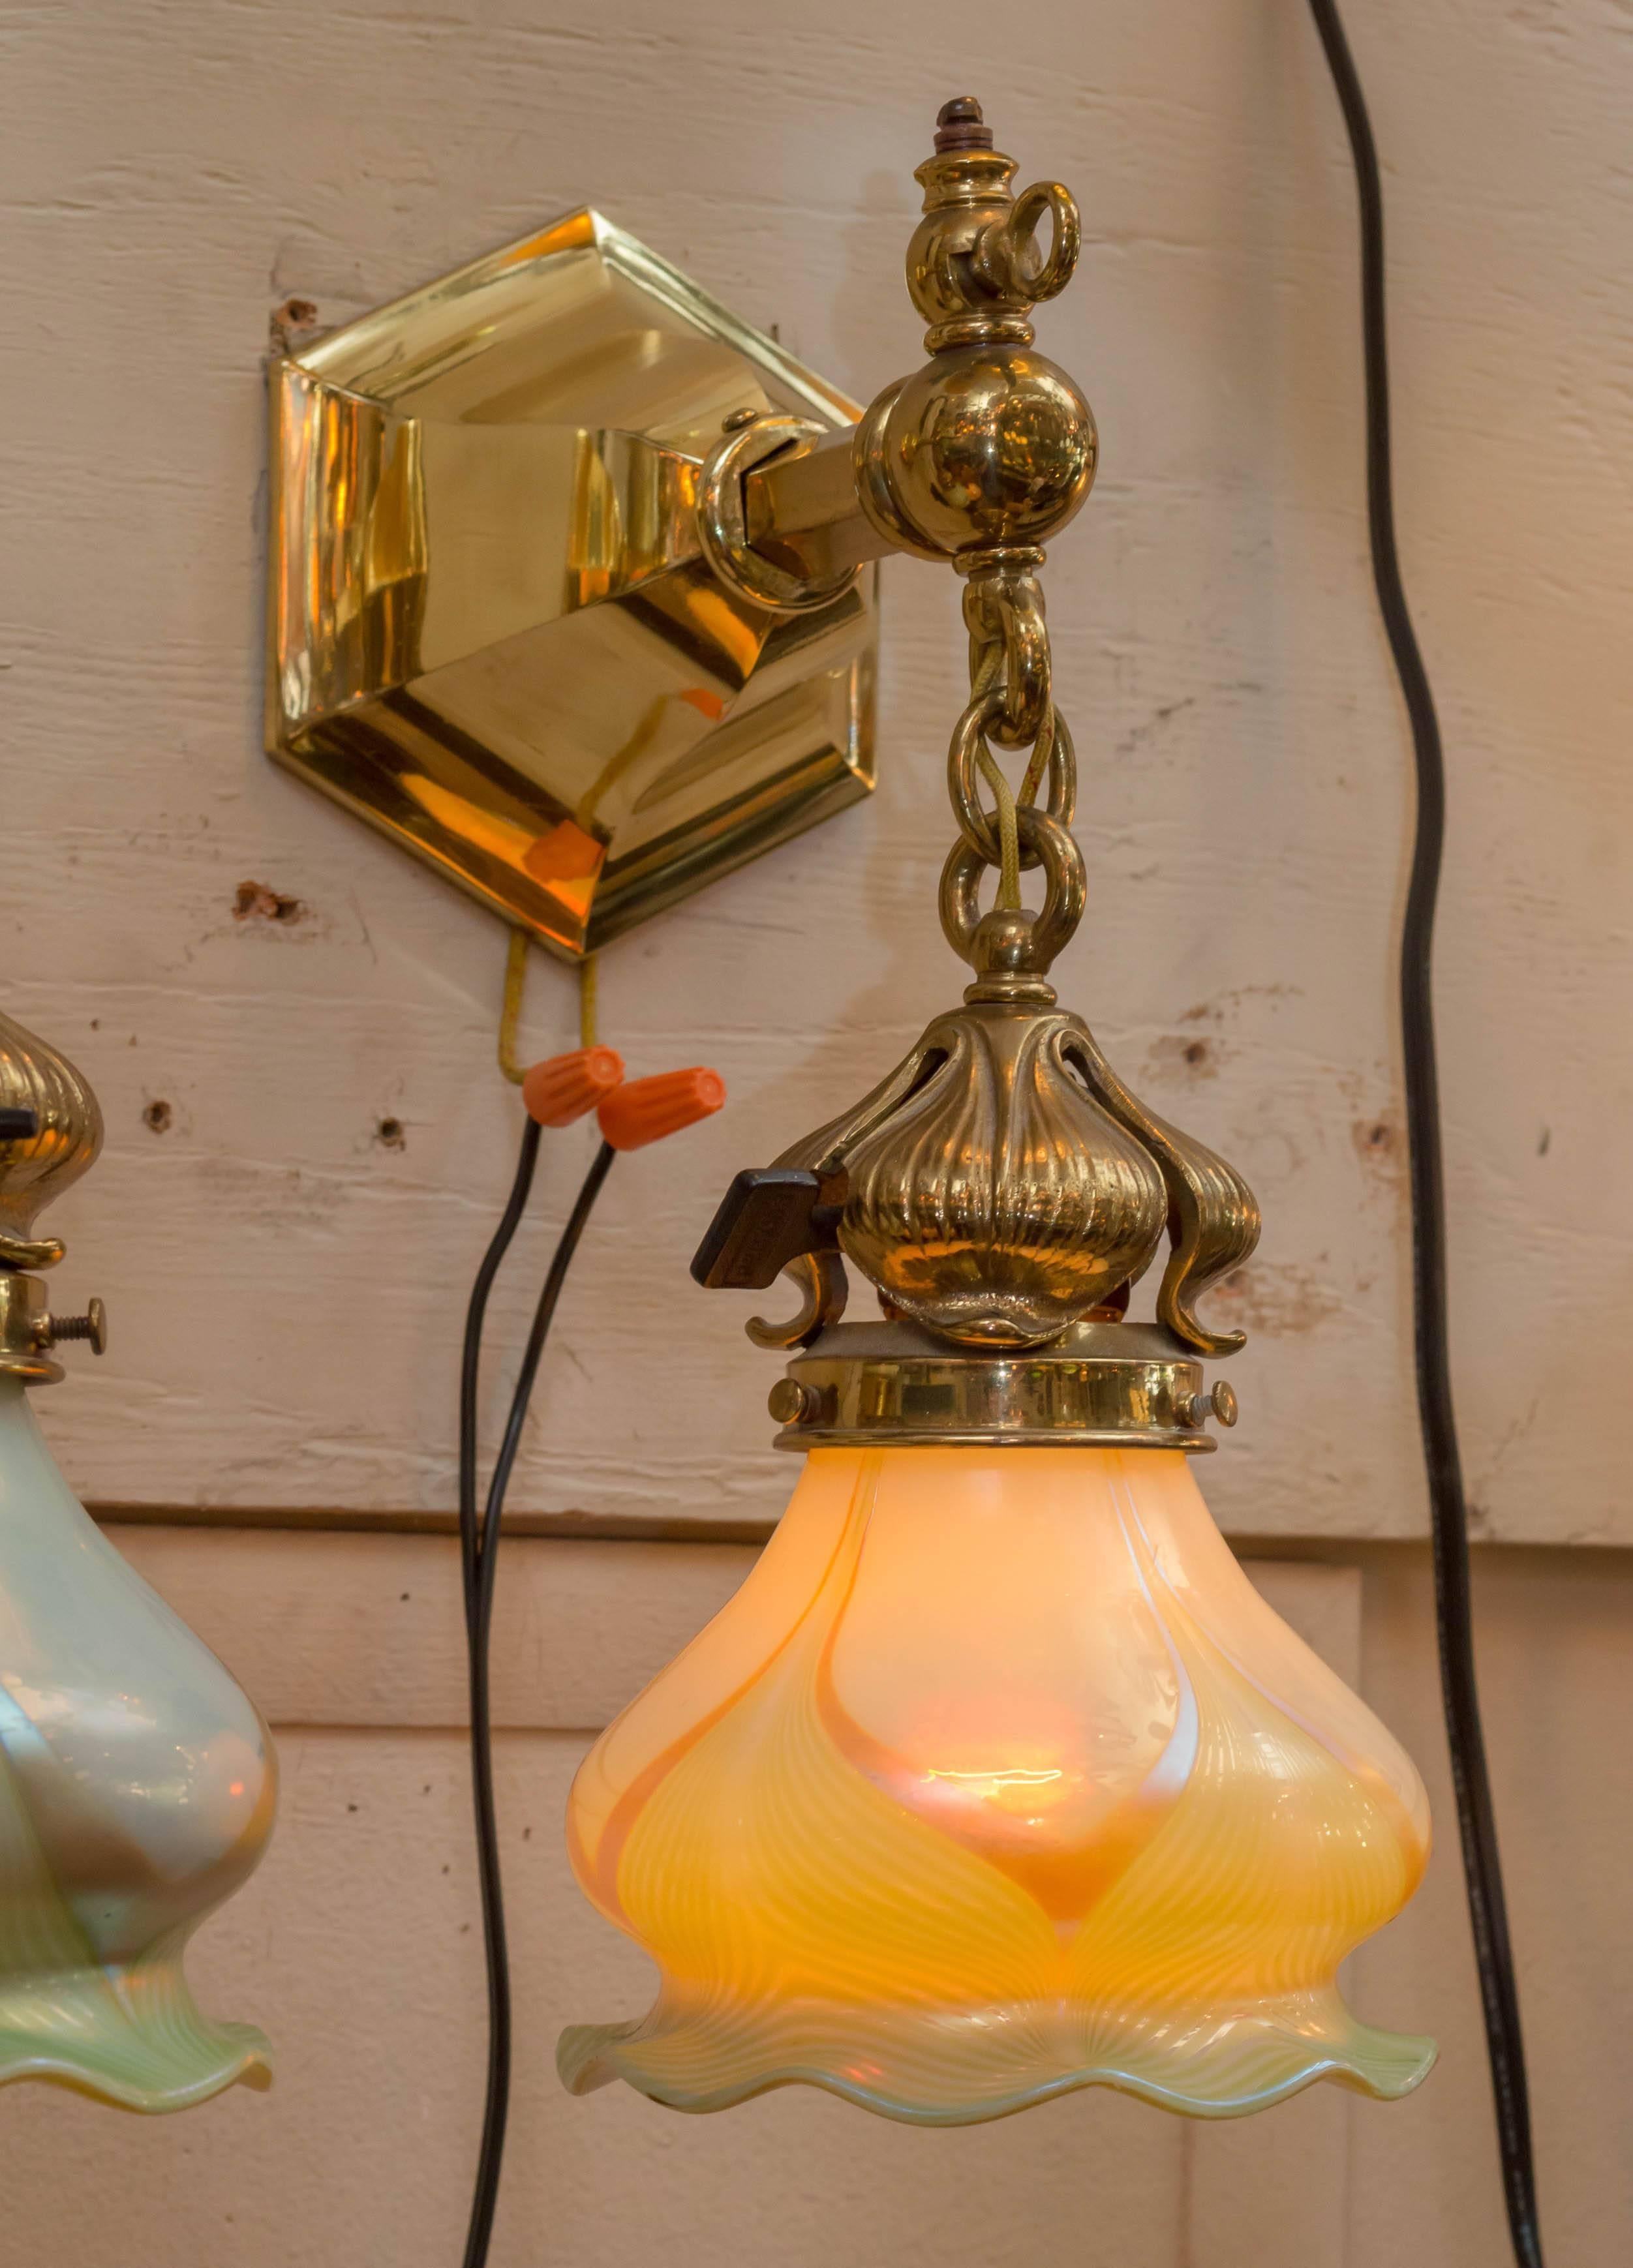 These polished brass sconces were originally gas and electric. If you look at the upper portion above the arm, you will see where a gas flame was originally used. It is all electrified now. The handblown art glass shades are exceptional. The pulled